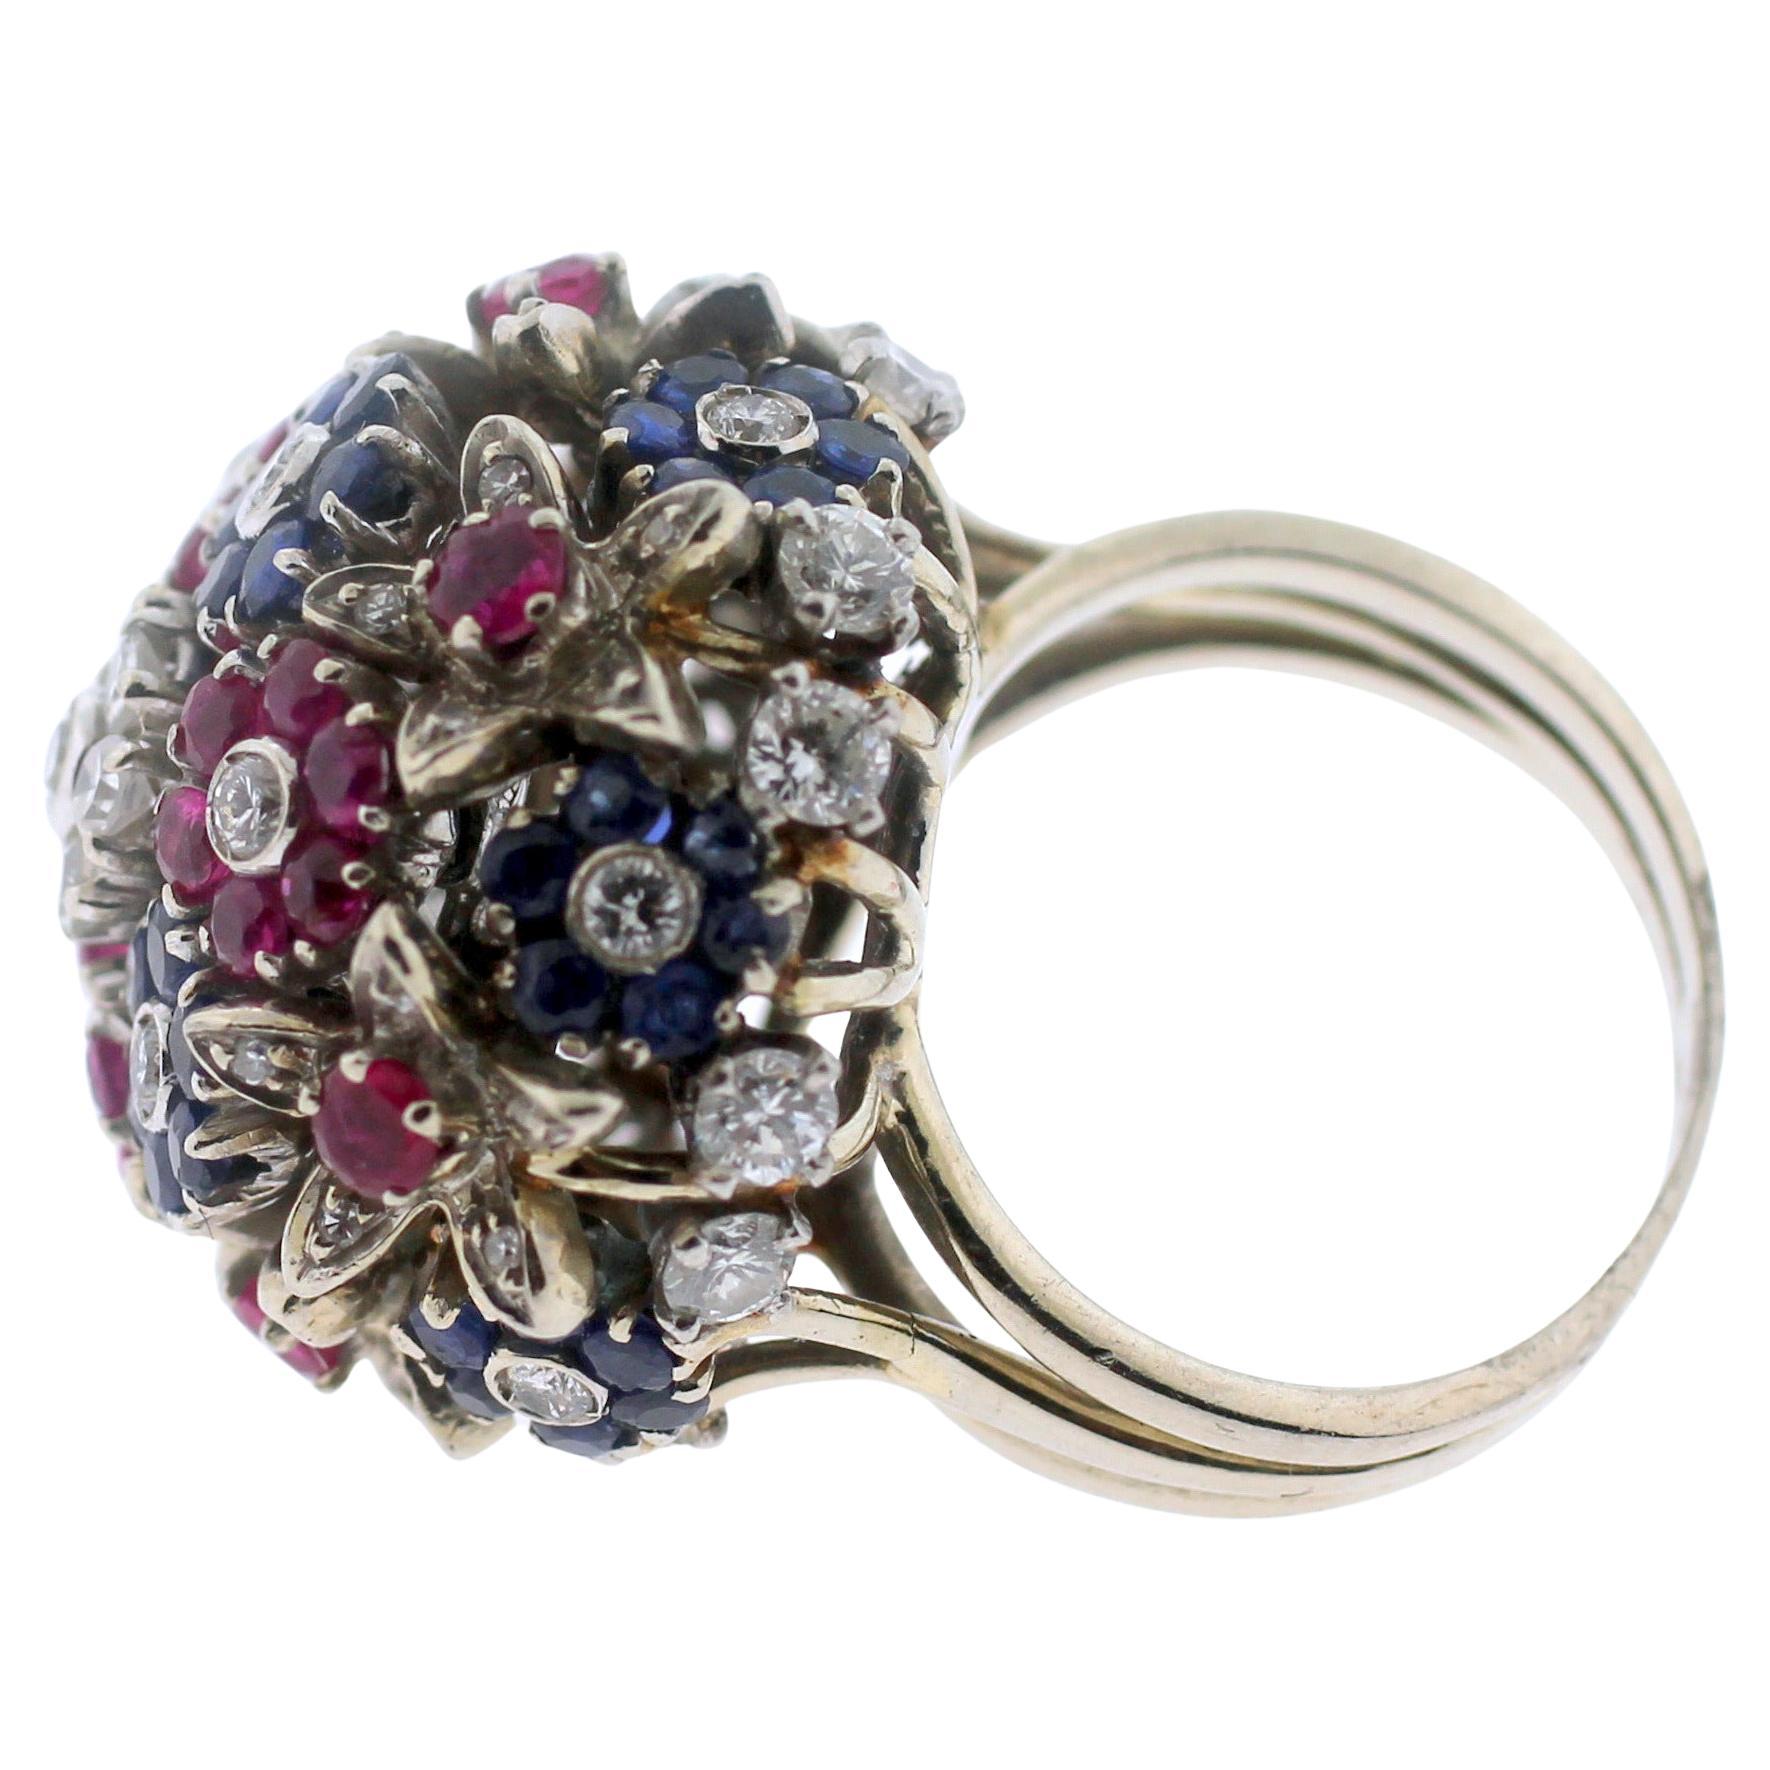 Jewel Of Ocean Estate Ring
White Gold  
Weight (g): 15.8 Grams
Diamonds, Ruby And Sapphire
Size: 23mm 
Shape: Round 
Maker: Estate Jewelry
Estimated Retail Price: $ 15,000
Excellent  Condition
All gemstone weights and measurements are approximate.